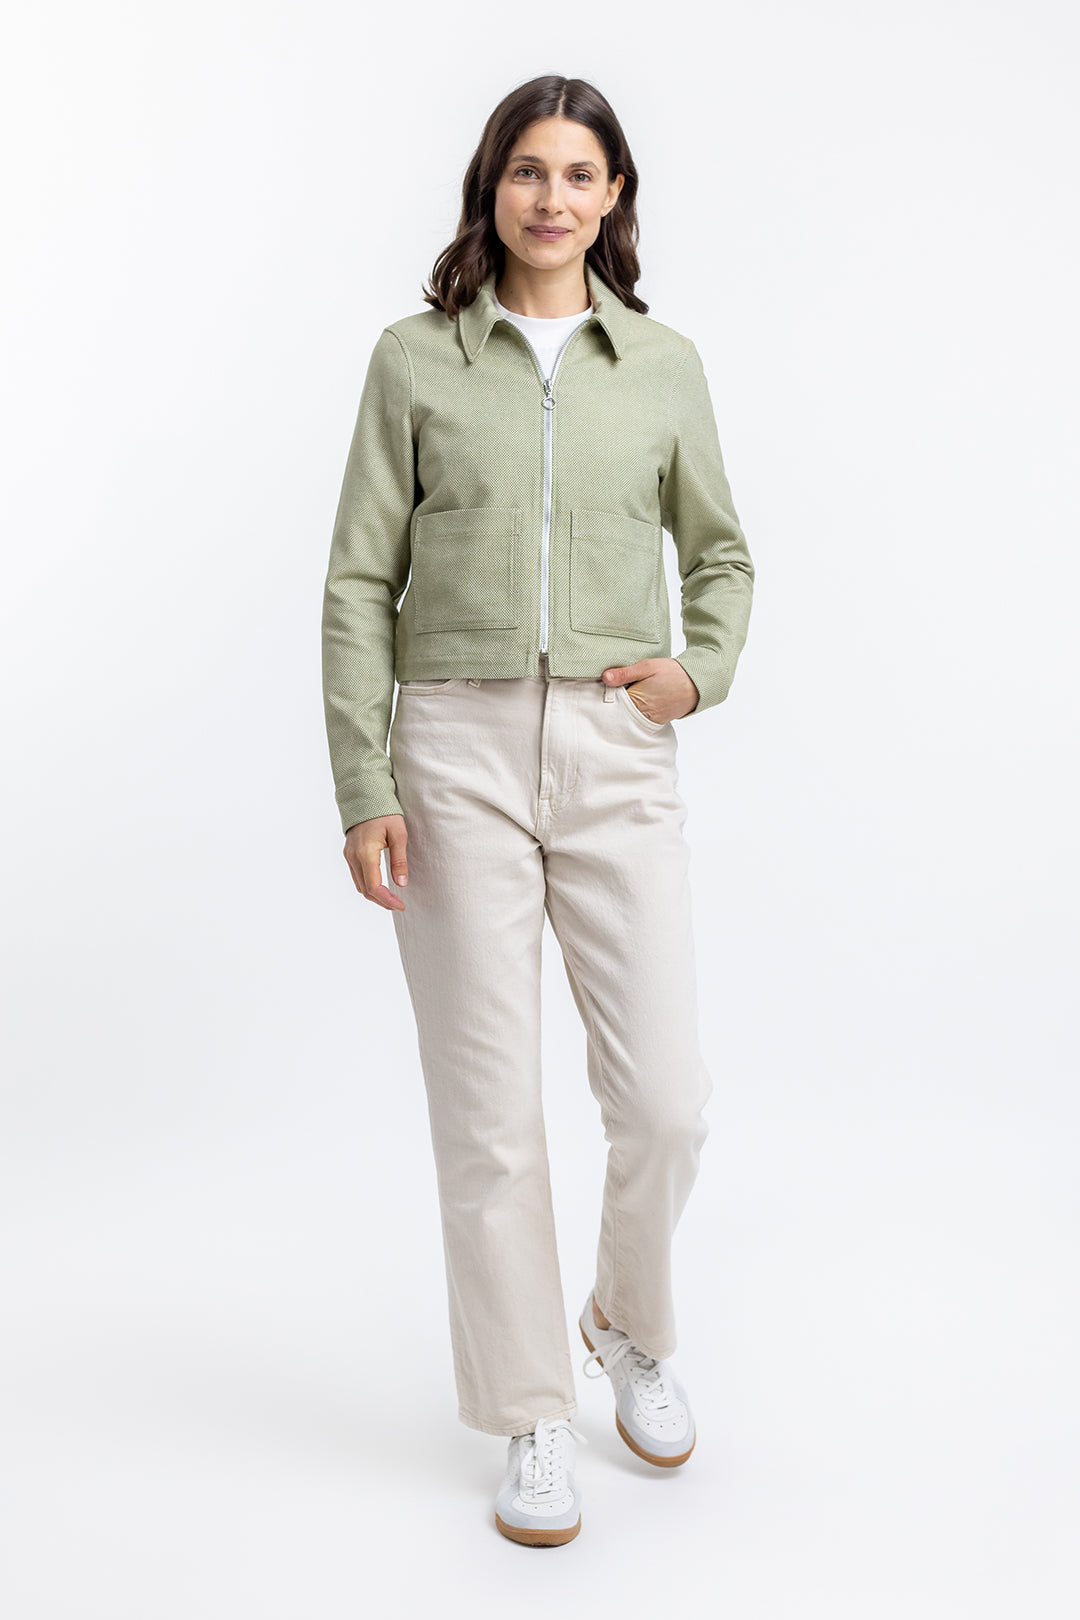 Light green, short jacket made from 100% organic cotton from Rotholz